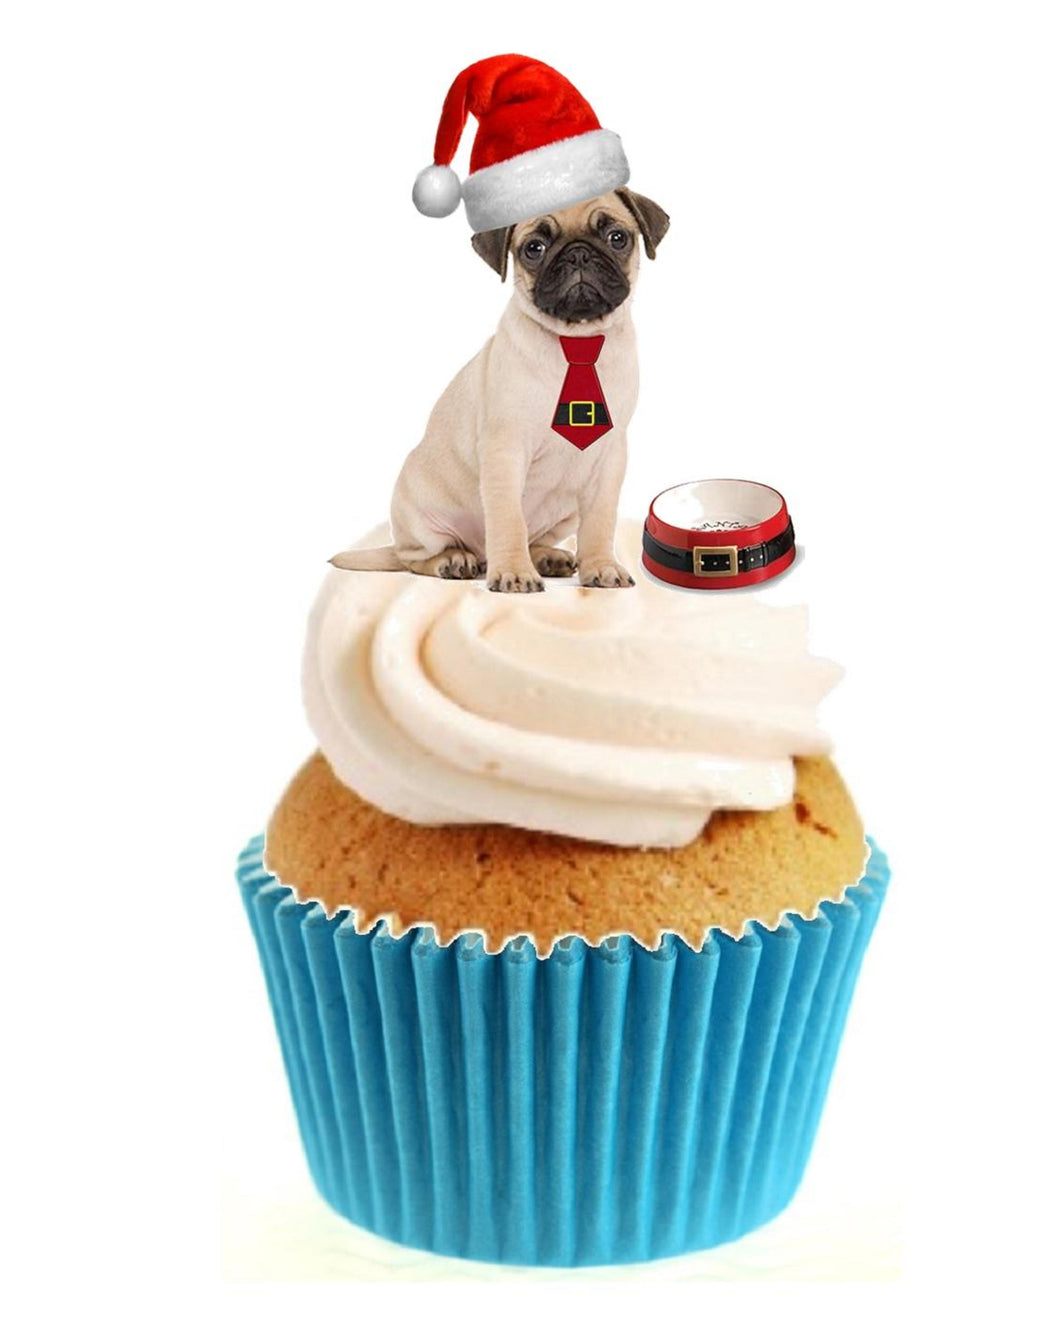 Christmas Pug Stand Up Cake Toppers (12 pack)  Pack contains 12 images printed onto premium wafer card